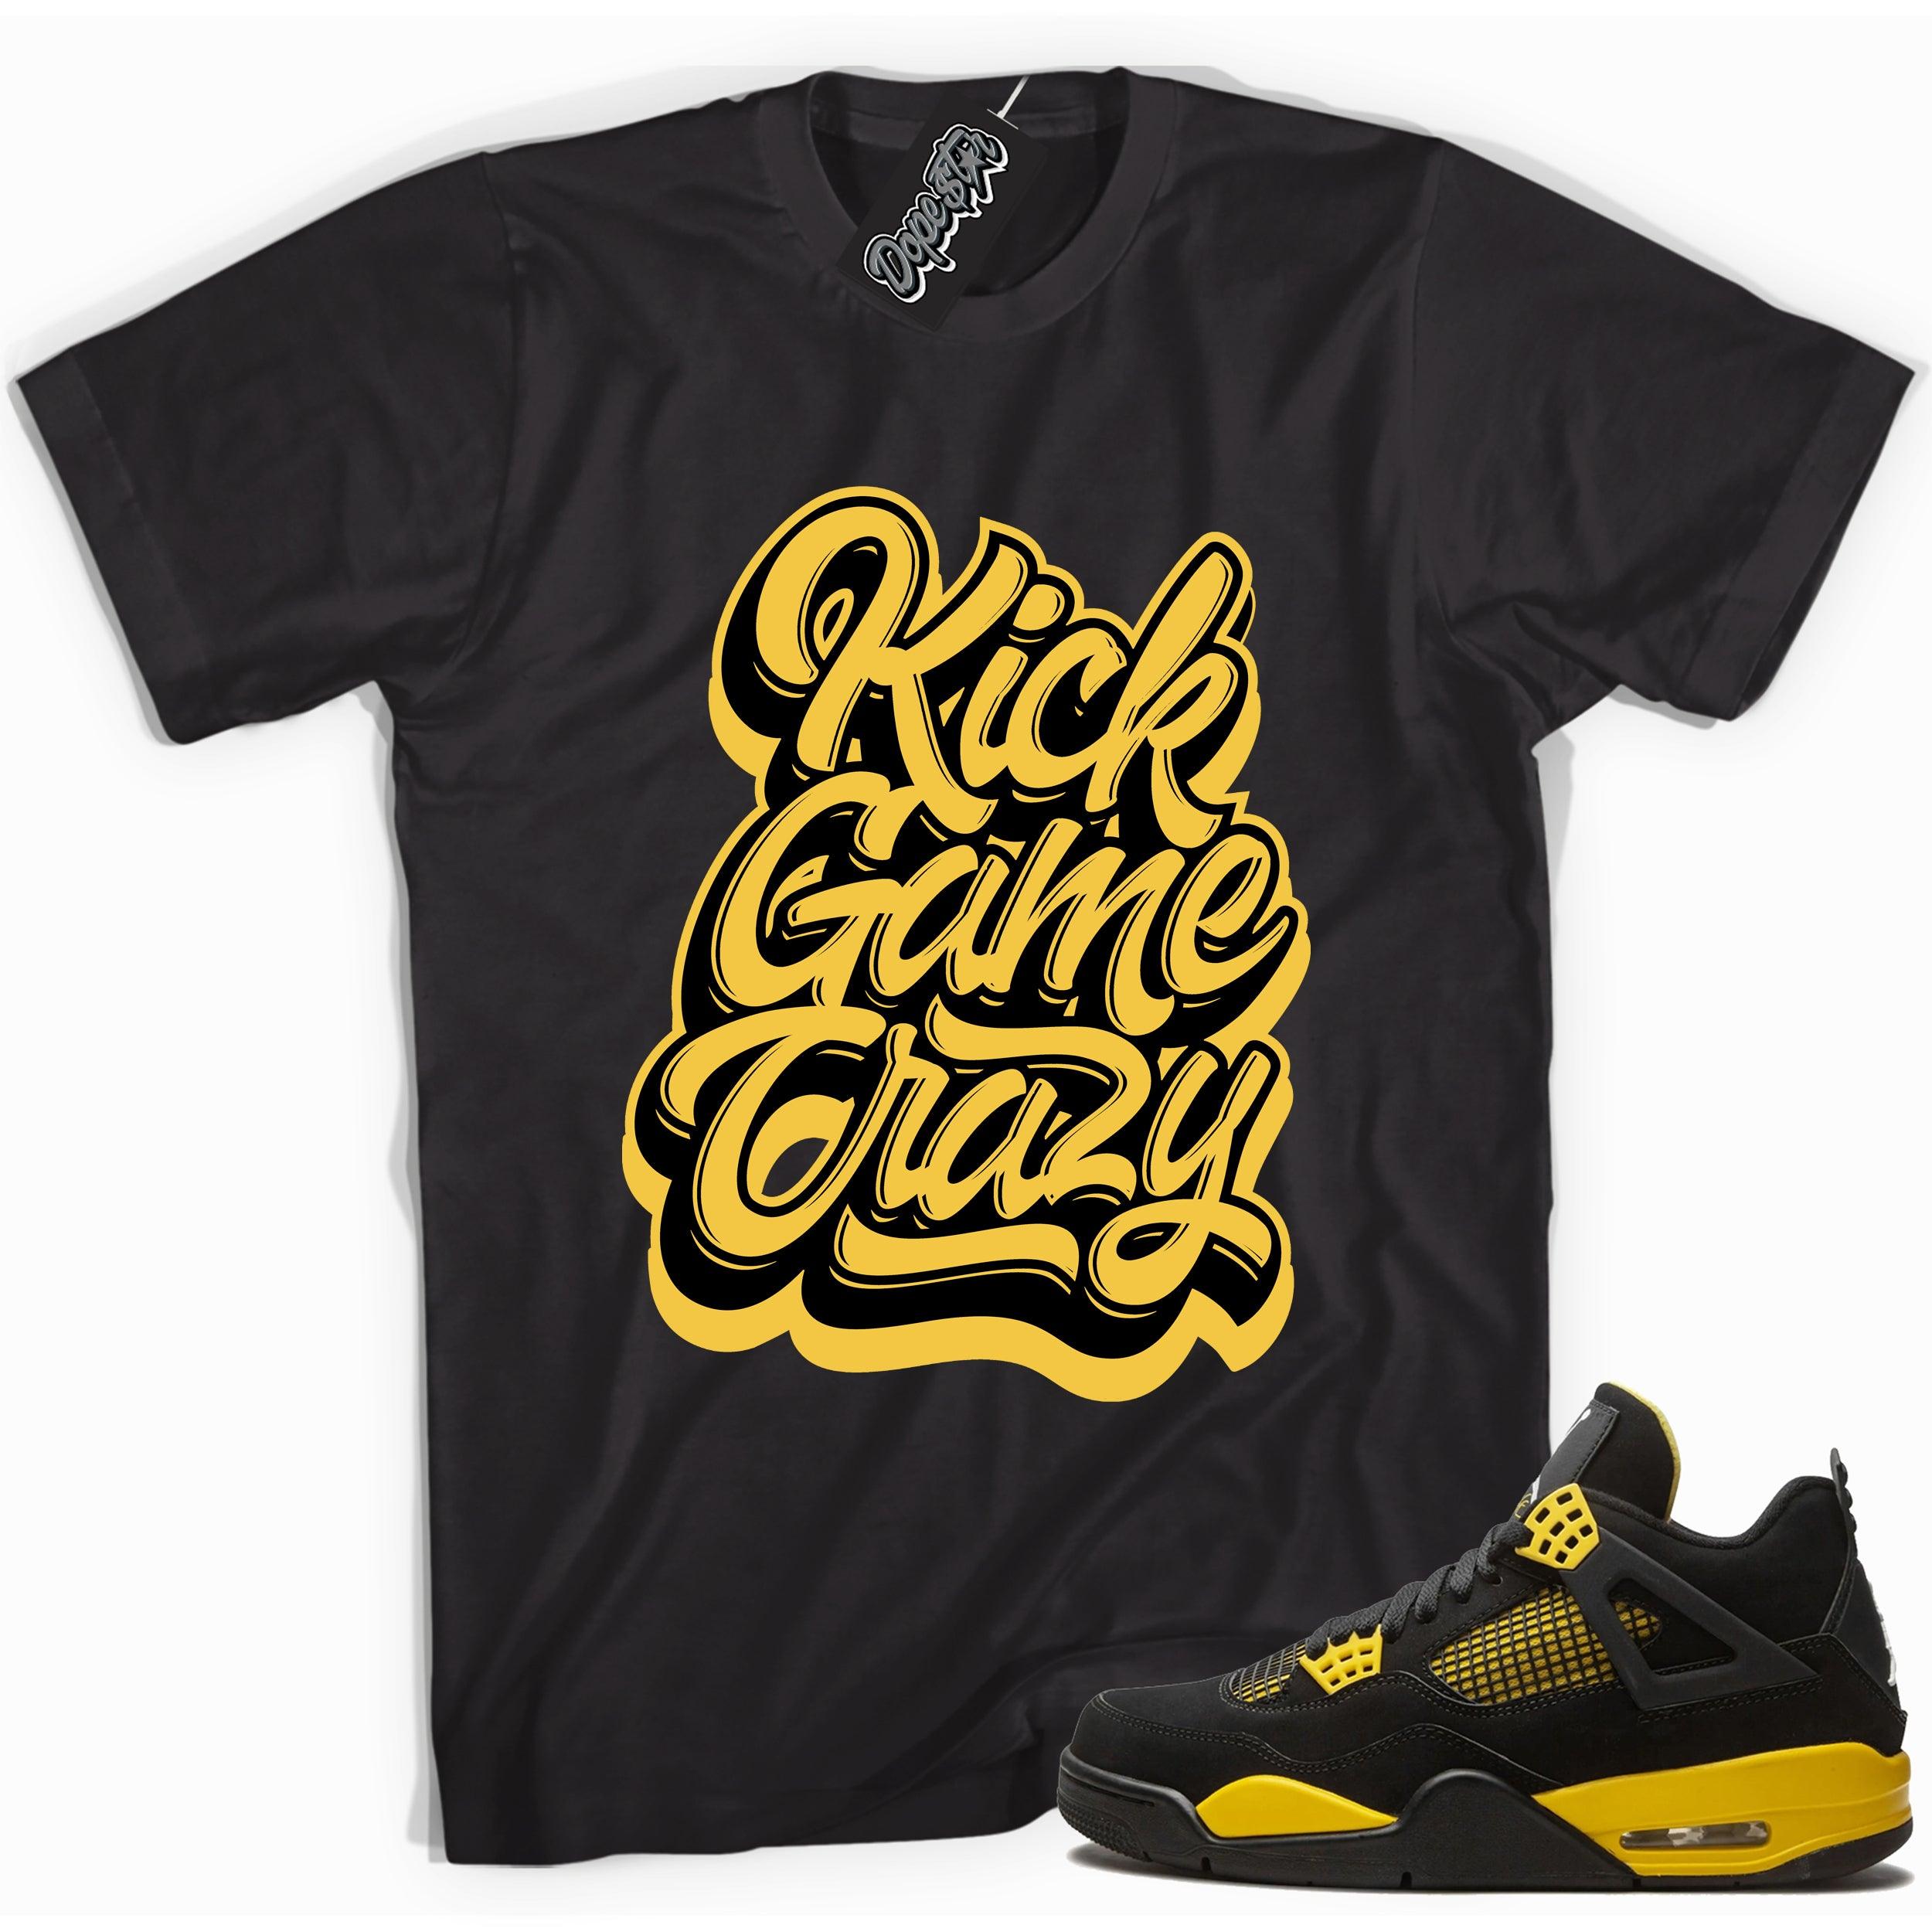 Cool black graphic tee with 'kick game crazy' print, that perfectly matches  Air Jordan 4 Thunder sneakers